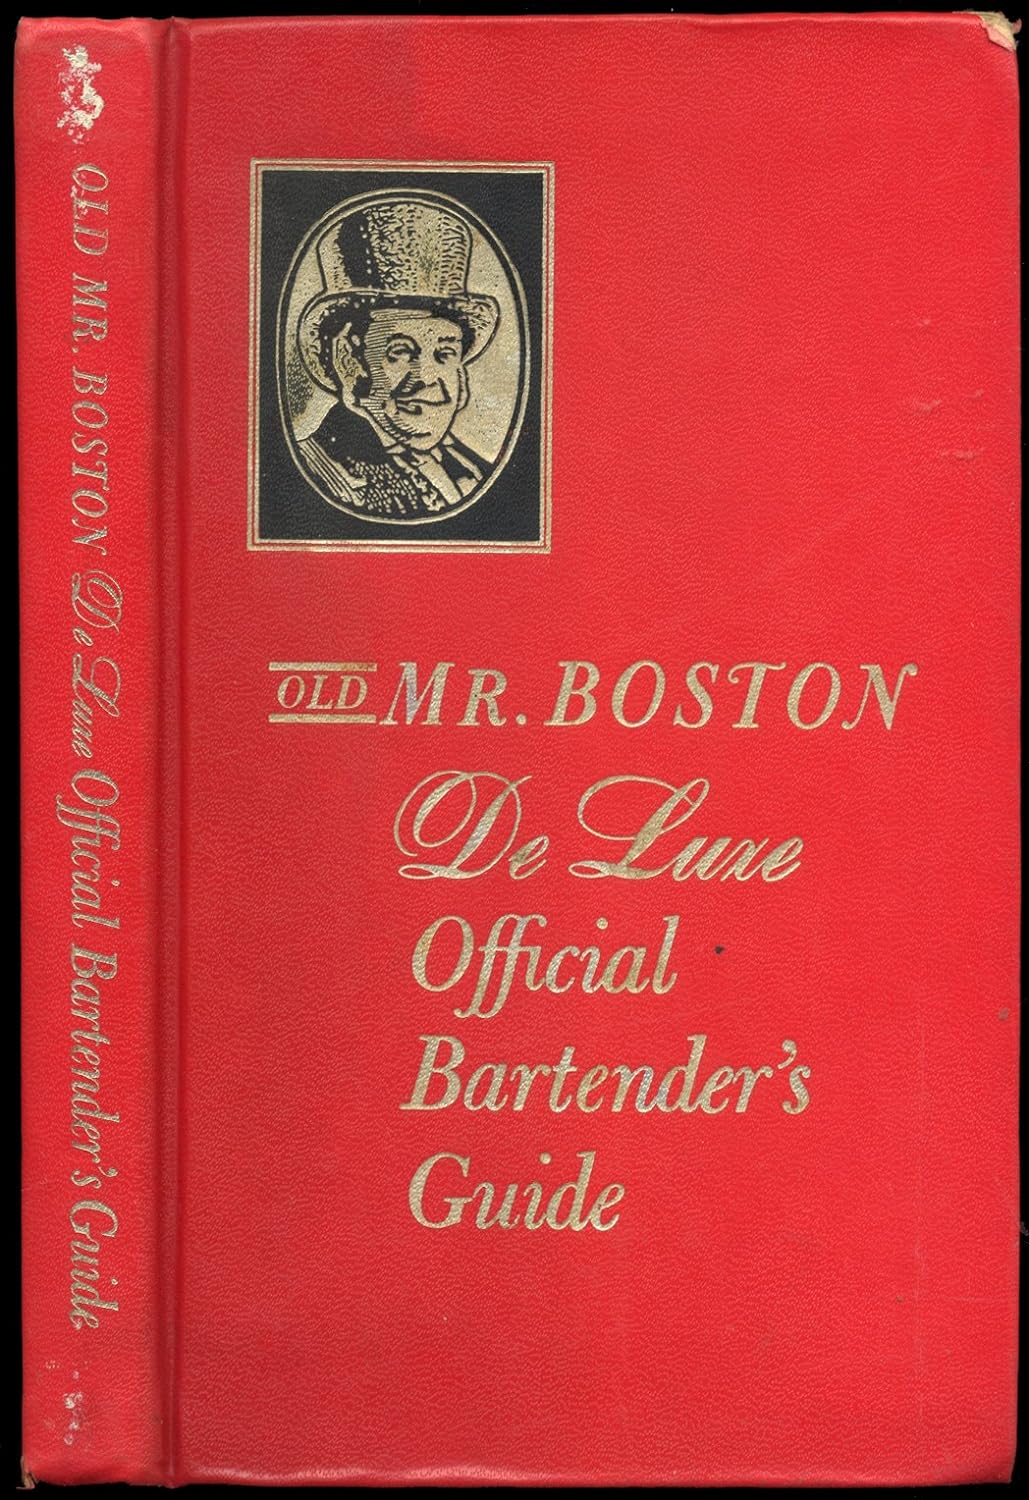 Old Mr. Boston De Luxe Official Bartenders Guide edited by Leo Cotton